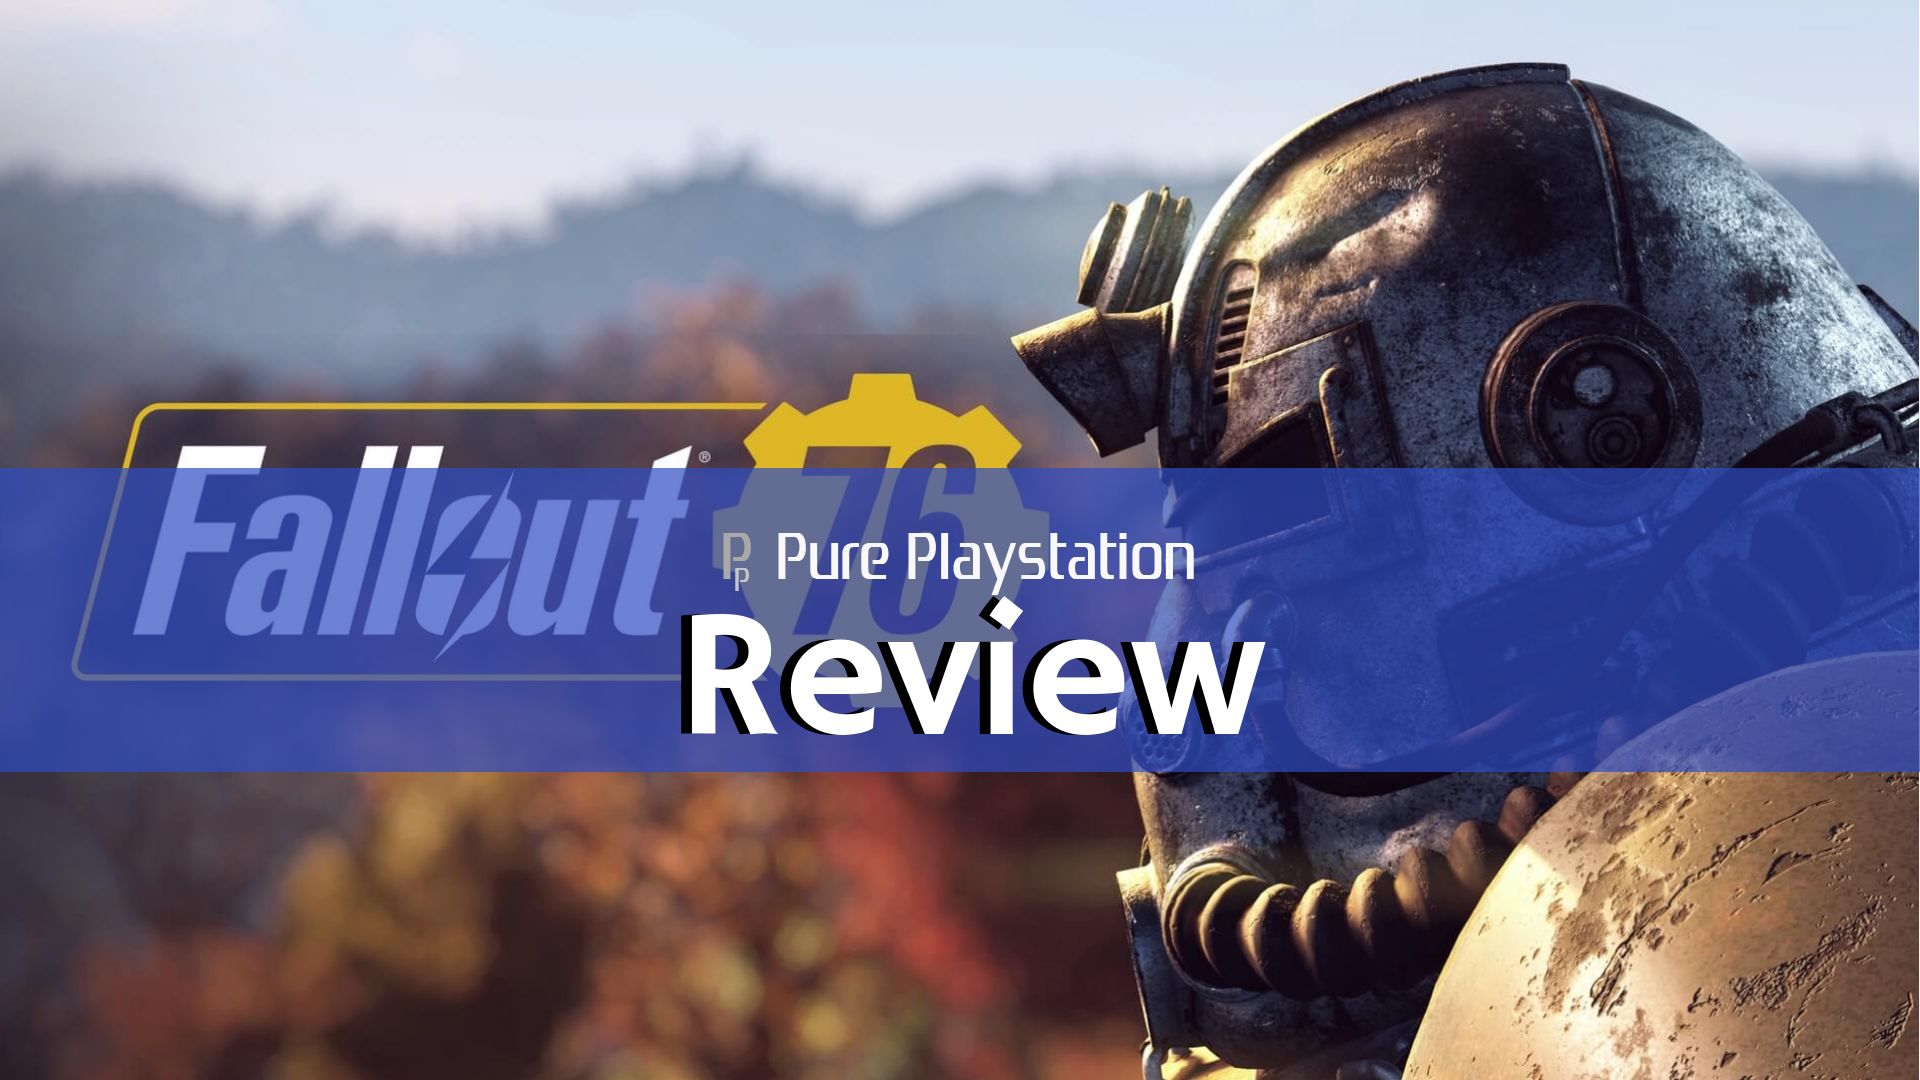 Review: Fallout 76 - PS4